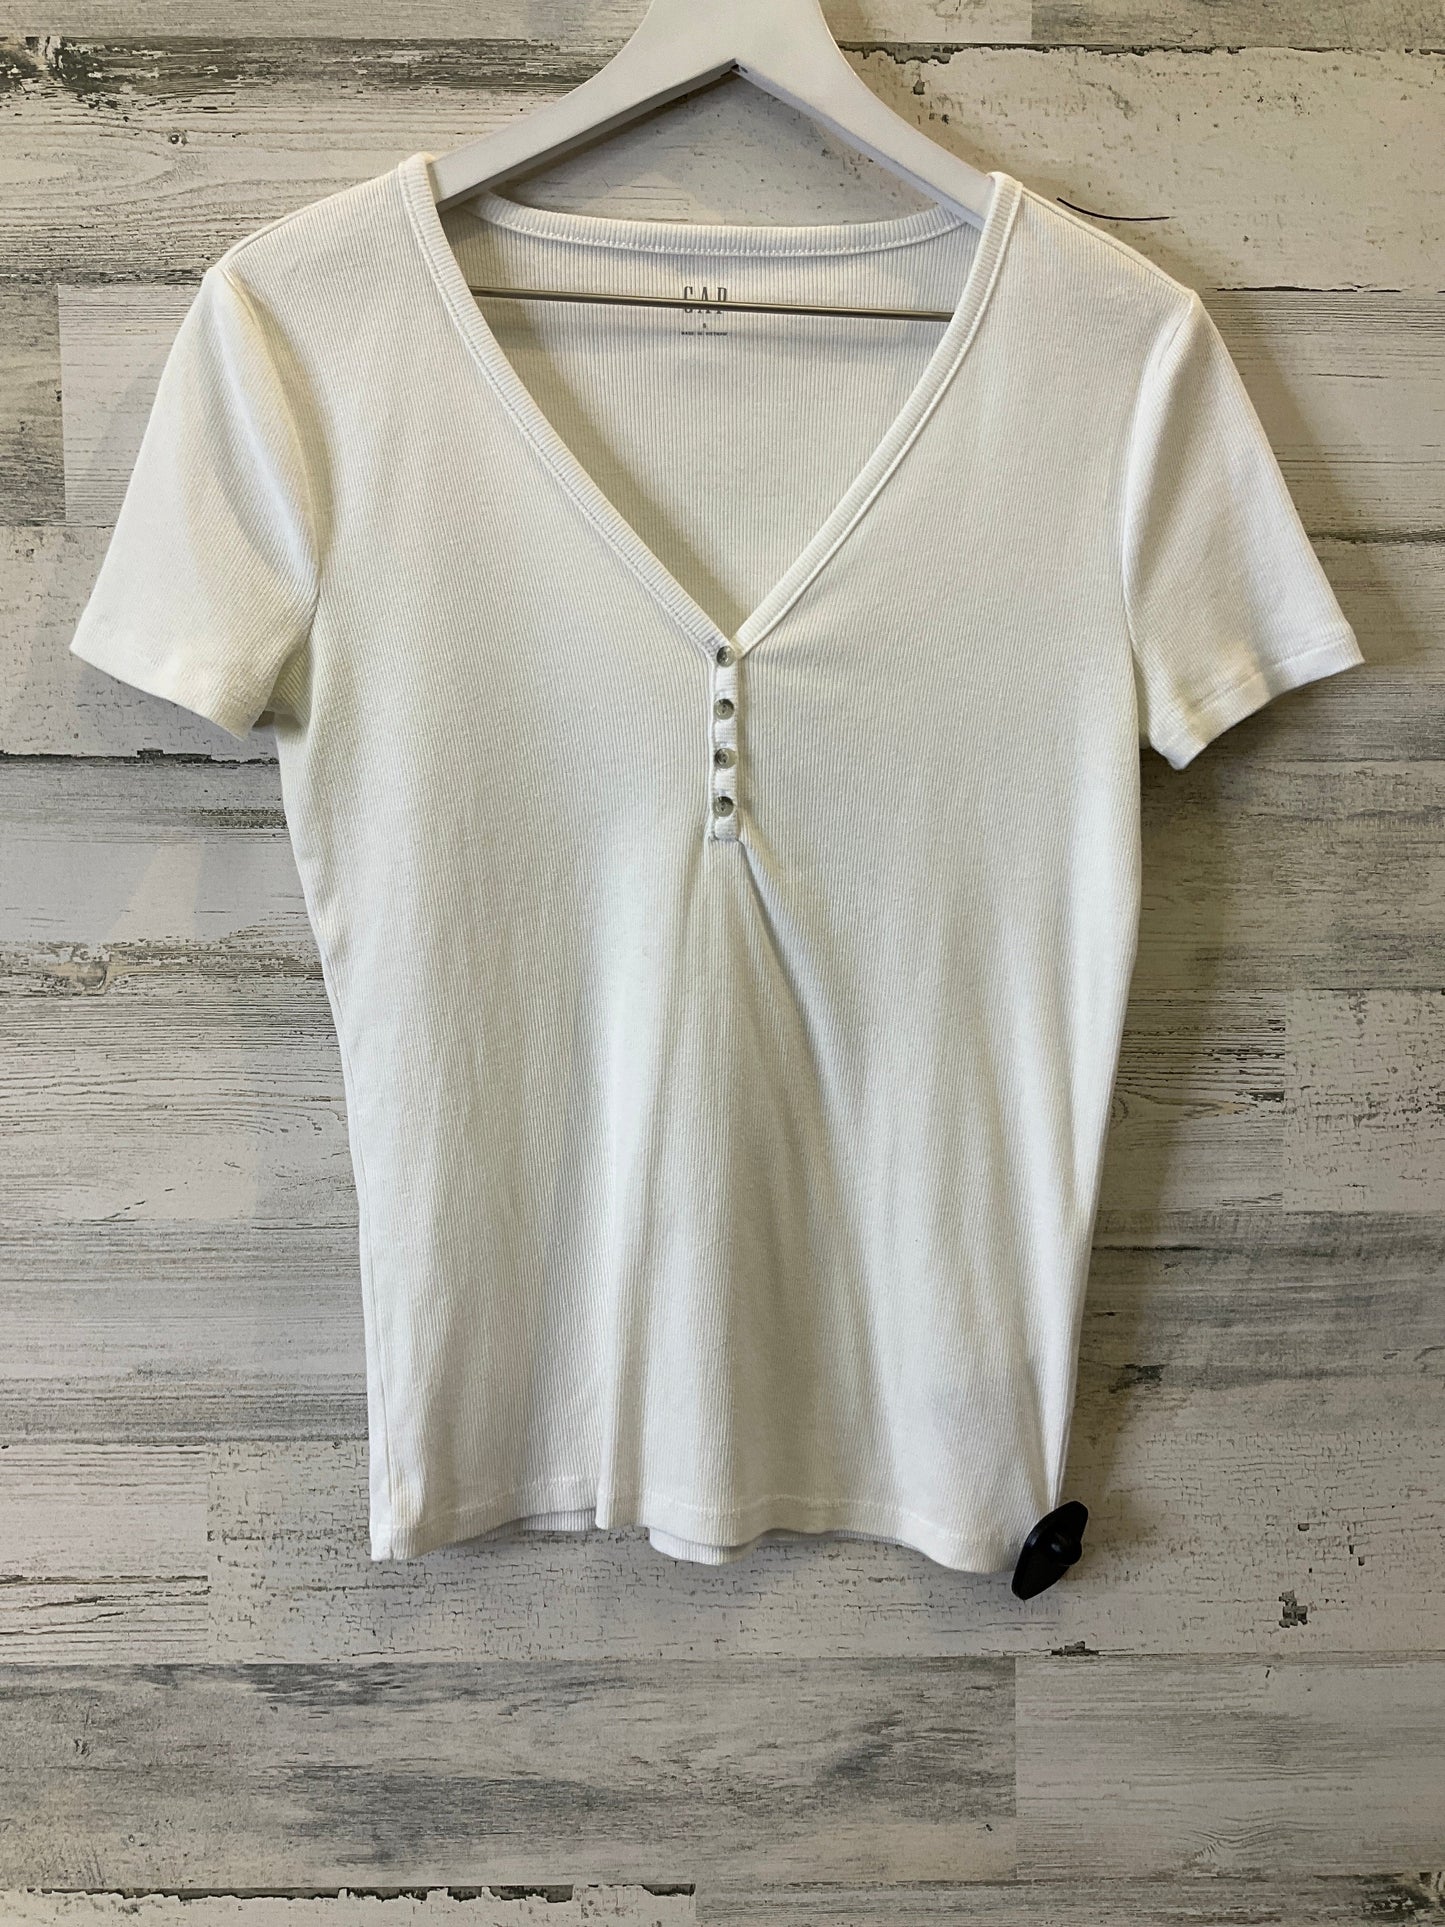 White Top Short Sleeve Gap, Size S